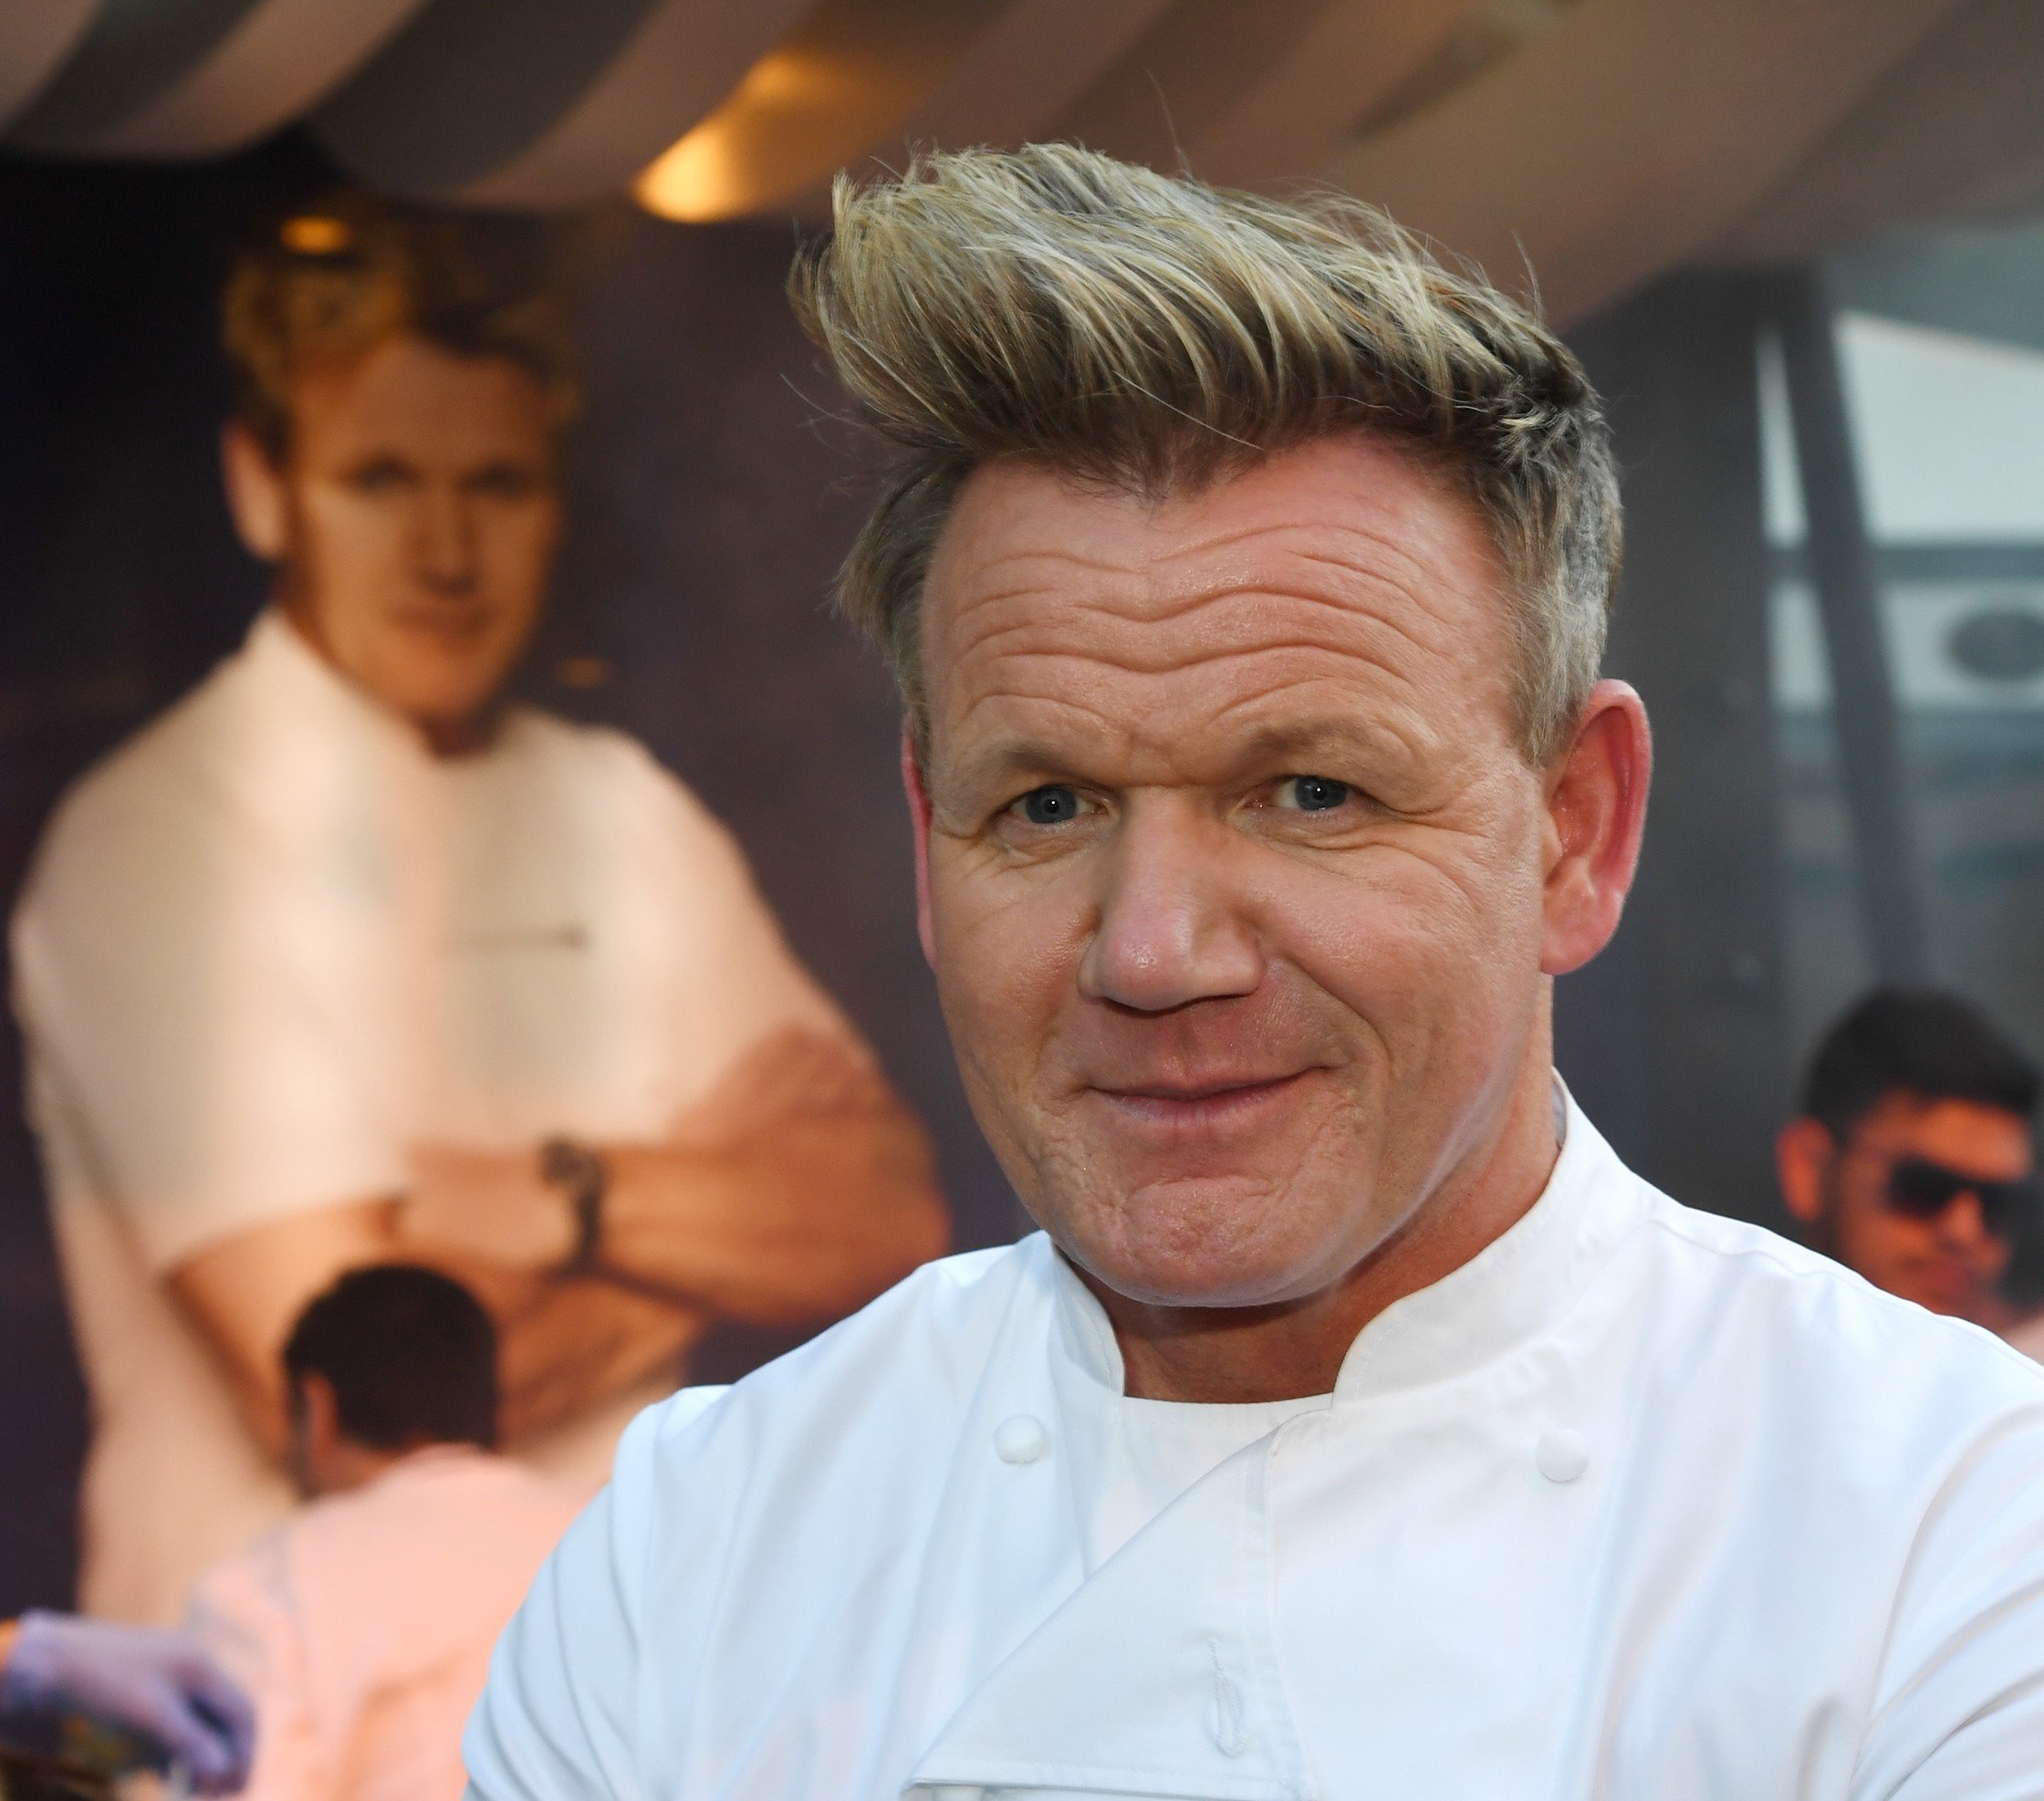 Chef and television personality Gordon Ramsay